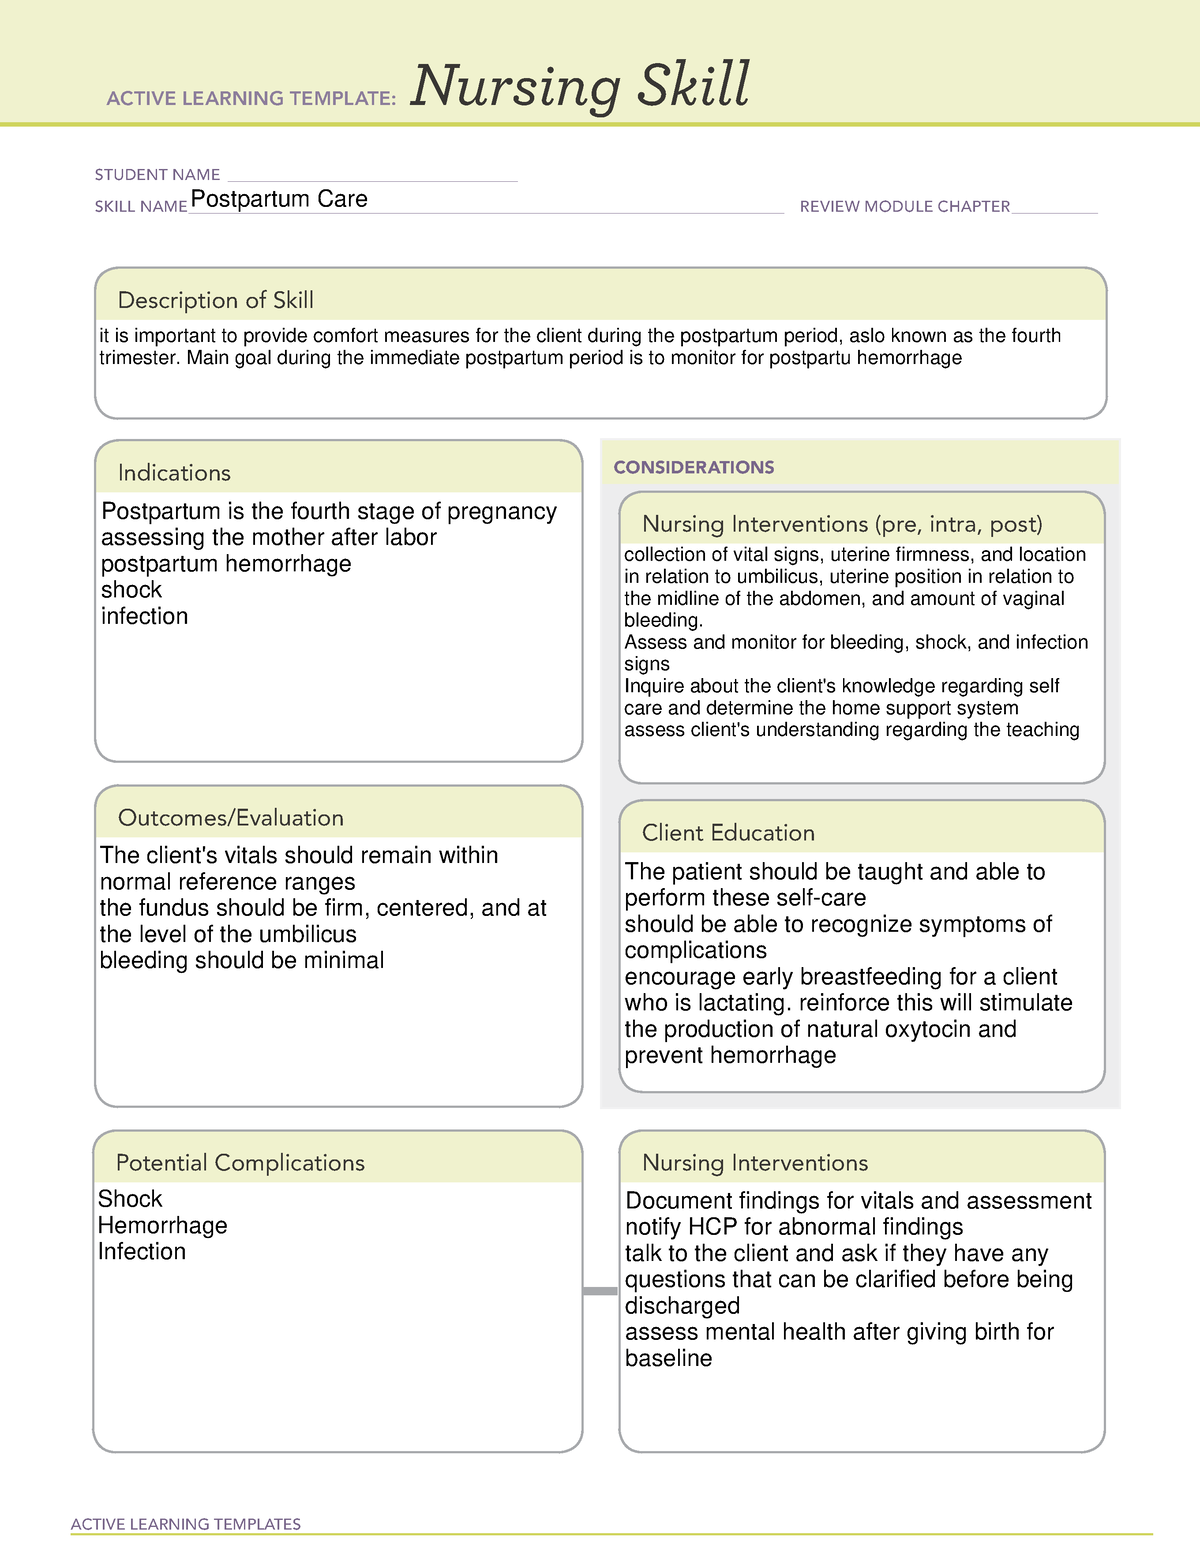 ATI thermoregulation post partum care - ACTIVE LEARNING TEMPLATES ...